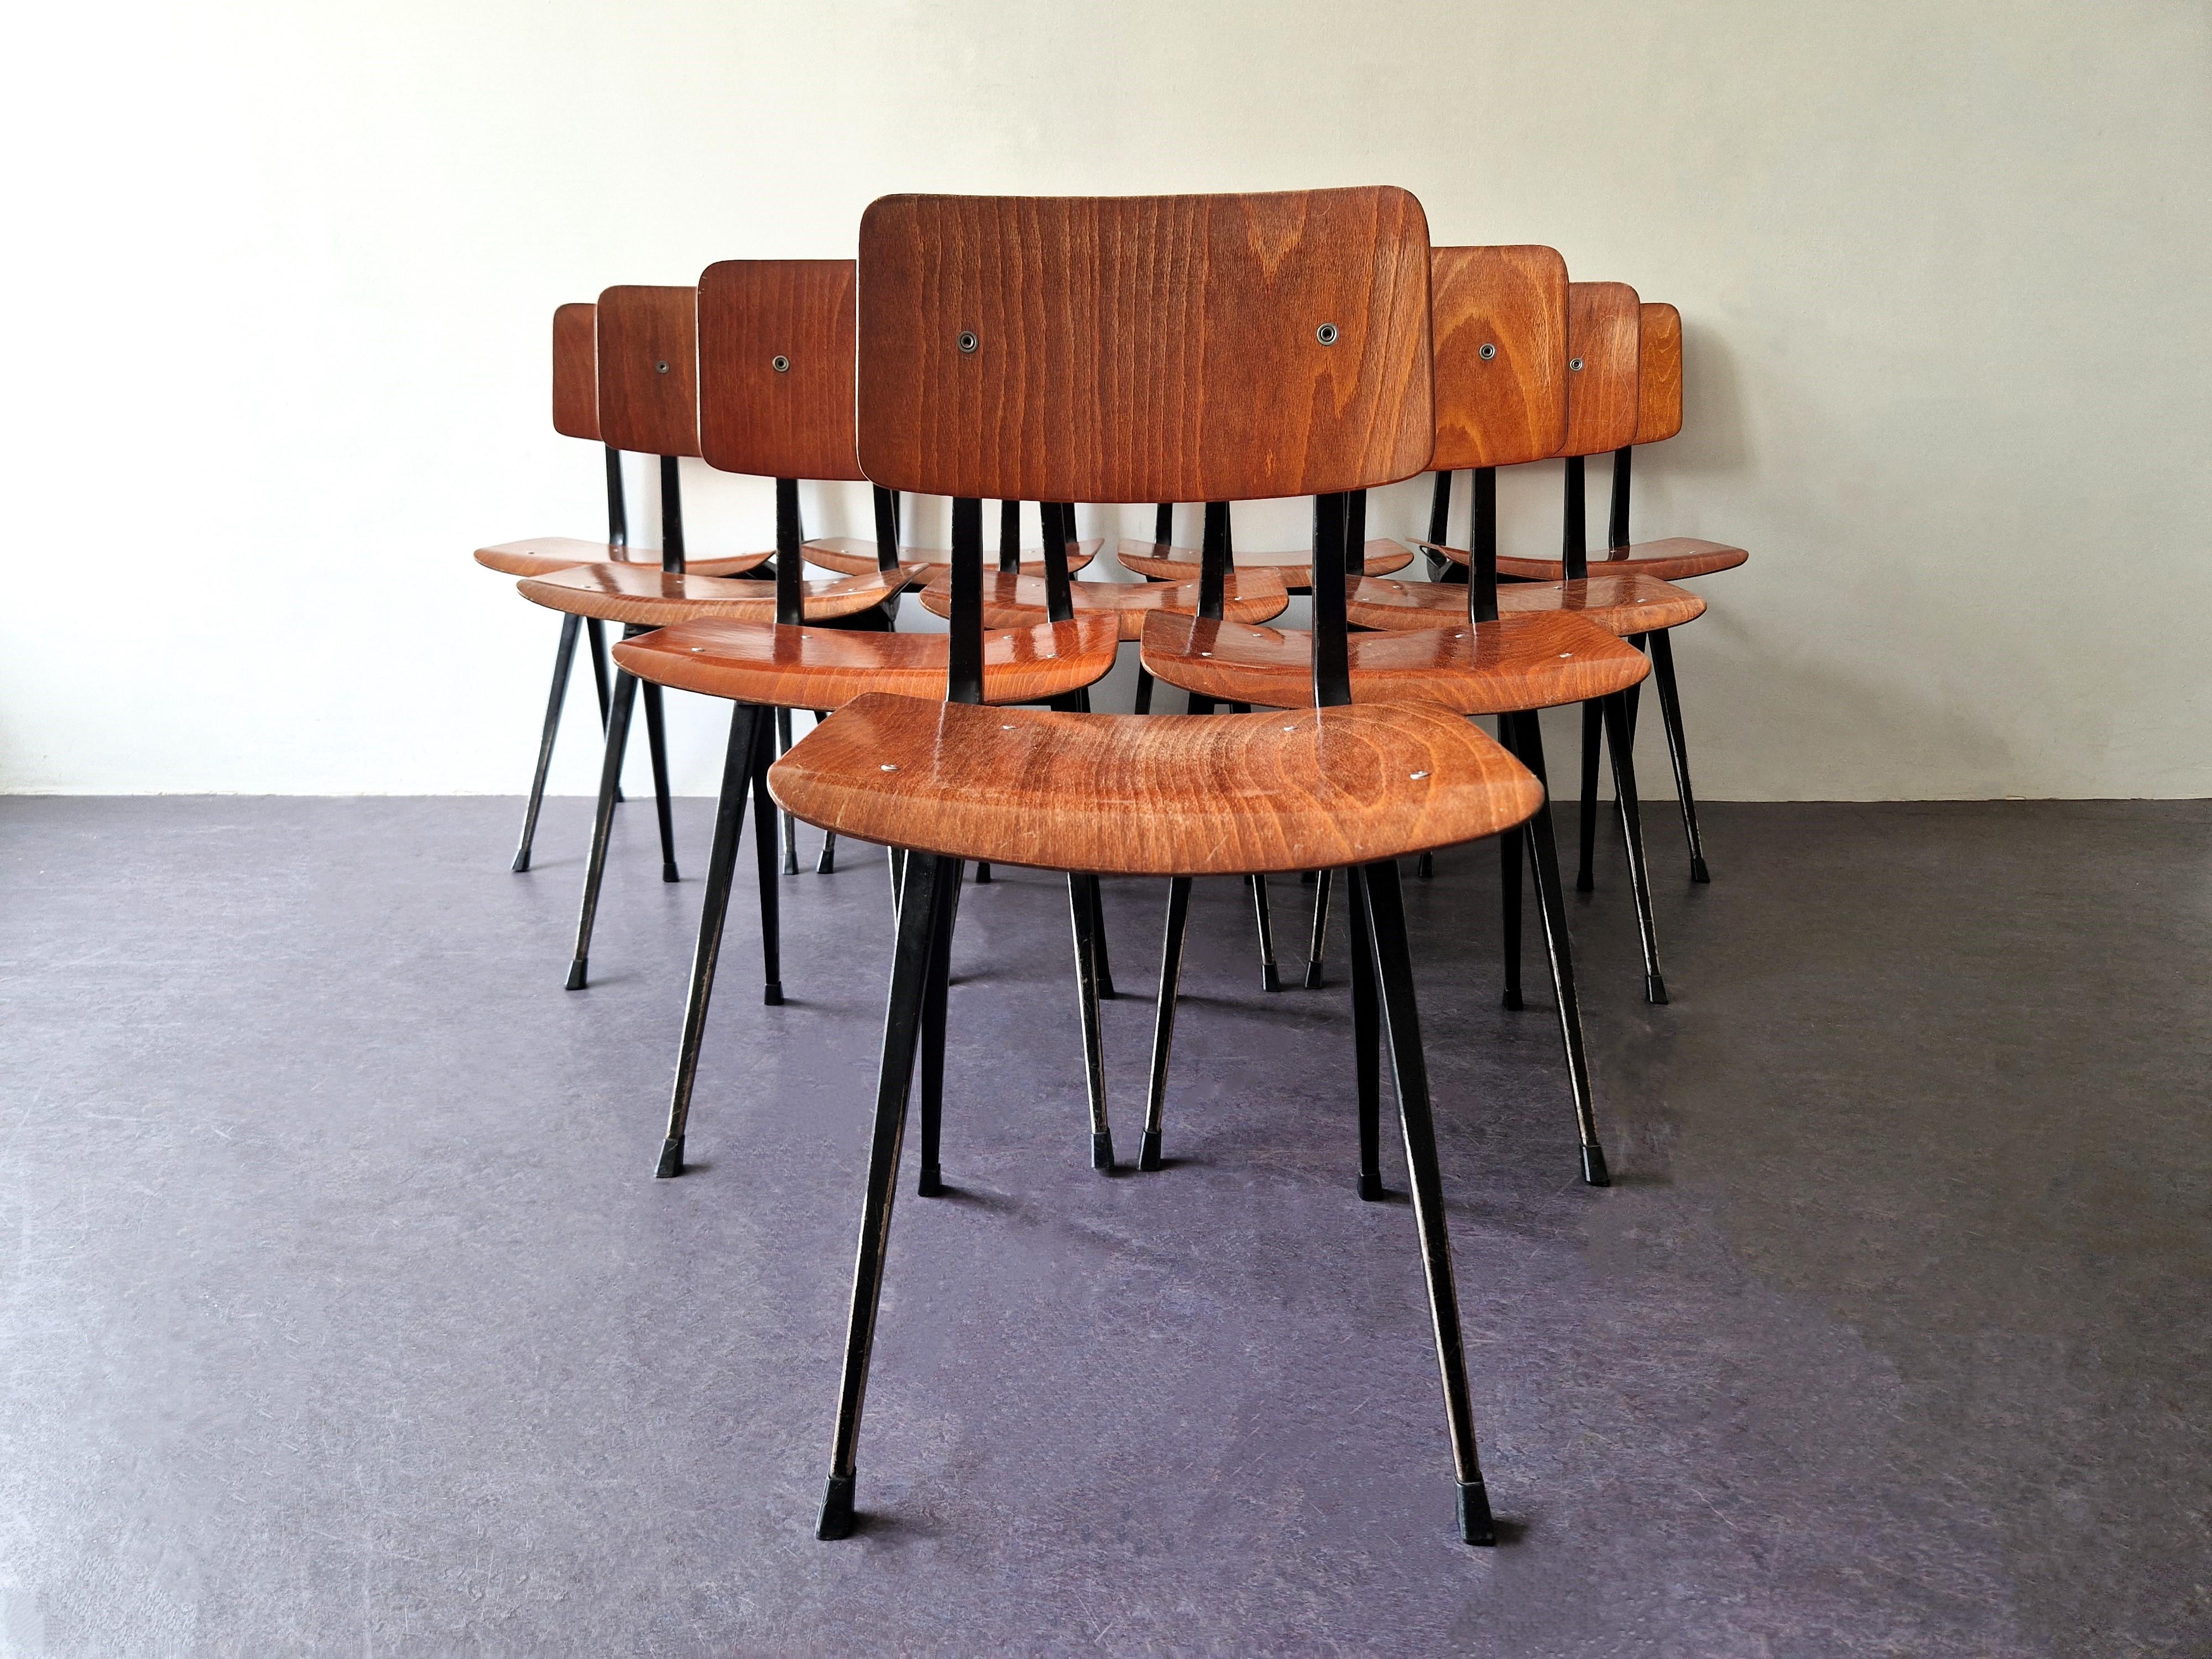 Metal Set of 10 Result chairs by Friso Kramer for Ahrend de Cirkel, 1960's/1970's For Sale